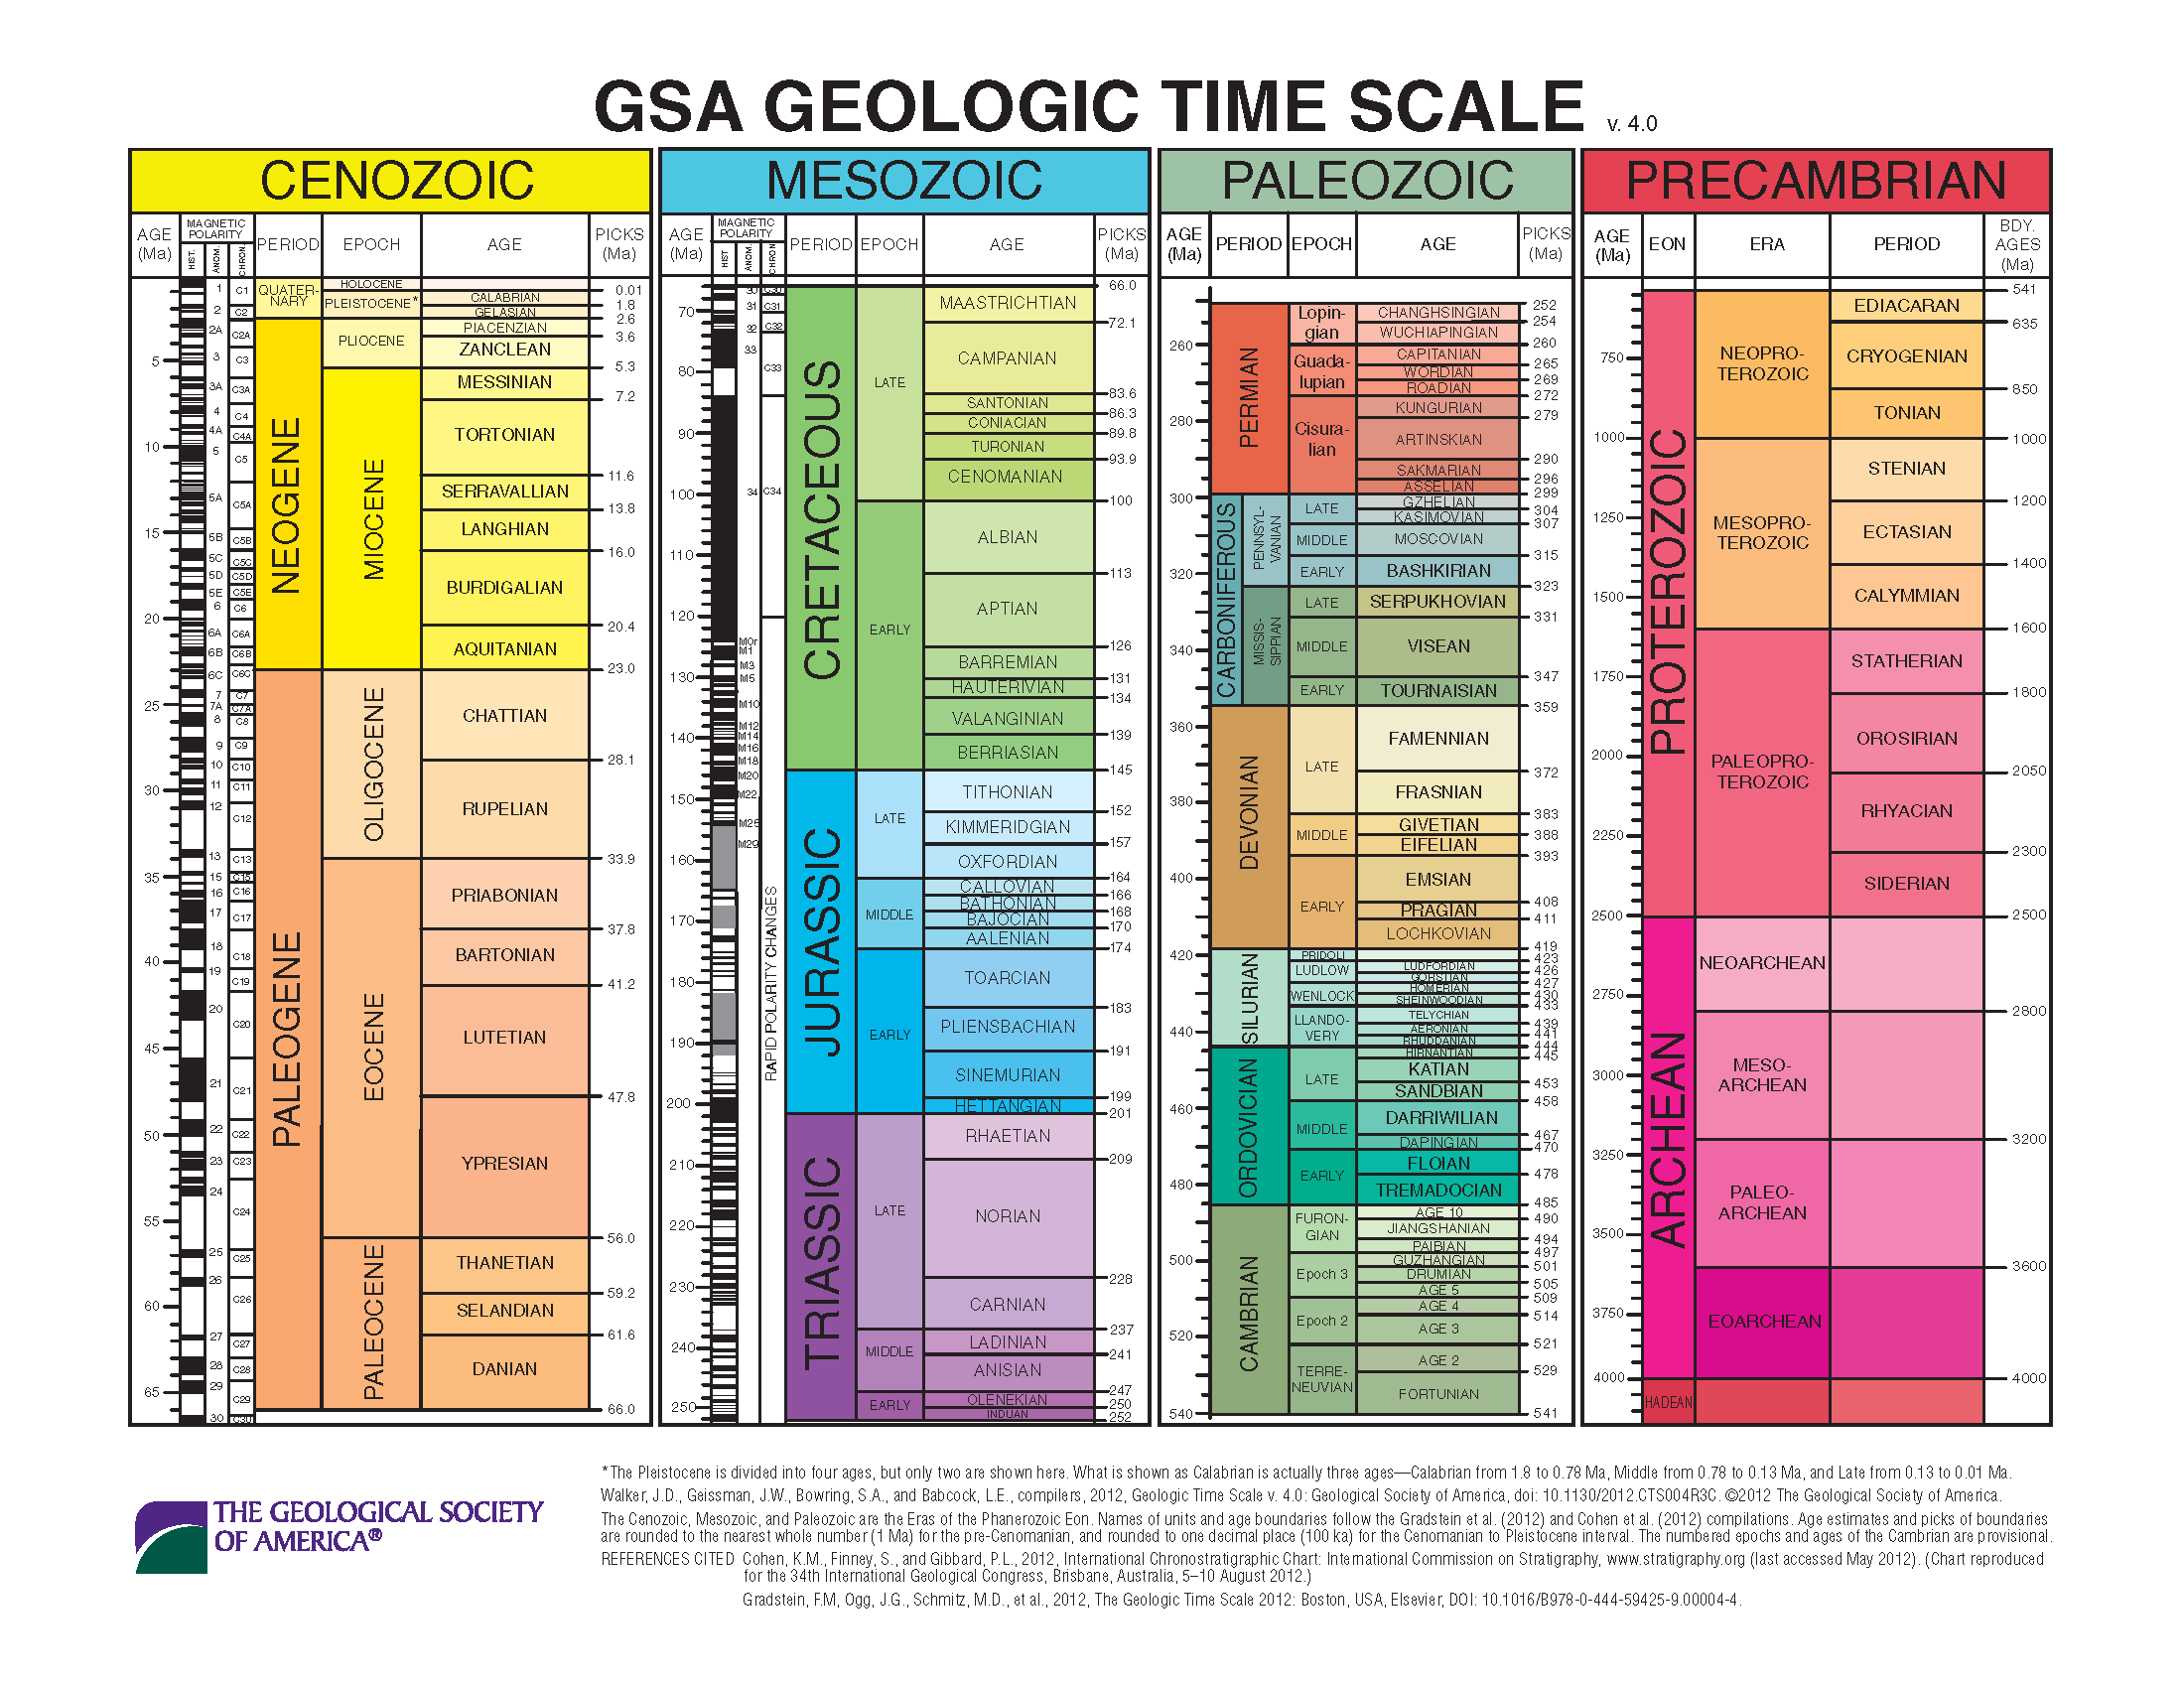 Geologic Society of America Geologic Time Scale, 2012. _Source: Walker, J.D., Geissman, J.W., Bowring, S.A., and Babcock, L.E., compilers (2012) Geologic Time Scale v. 4.0: Geological Society of America, doi: 10.1130/2012.CTS004R3C. [Download PDF](https://www.geosociety.org/documents/gsa/timescale/timescl.pdf)_